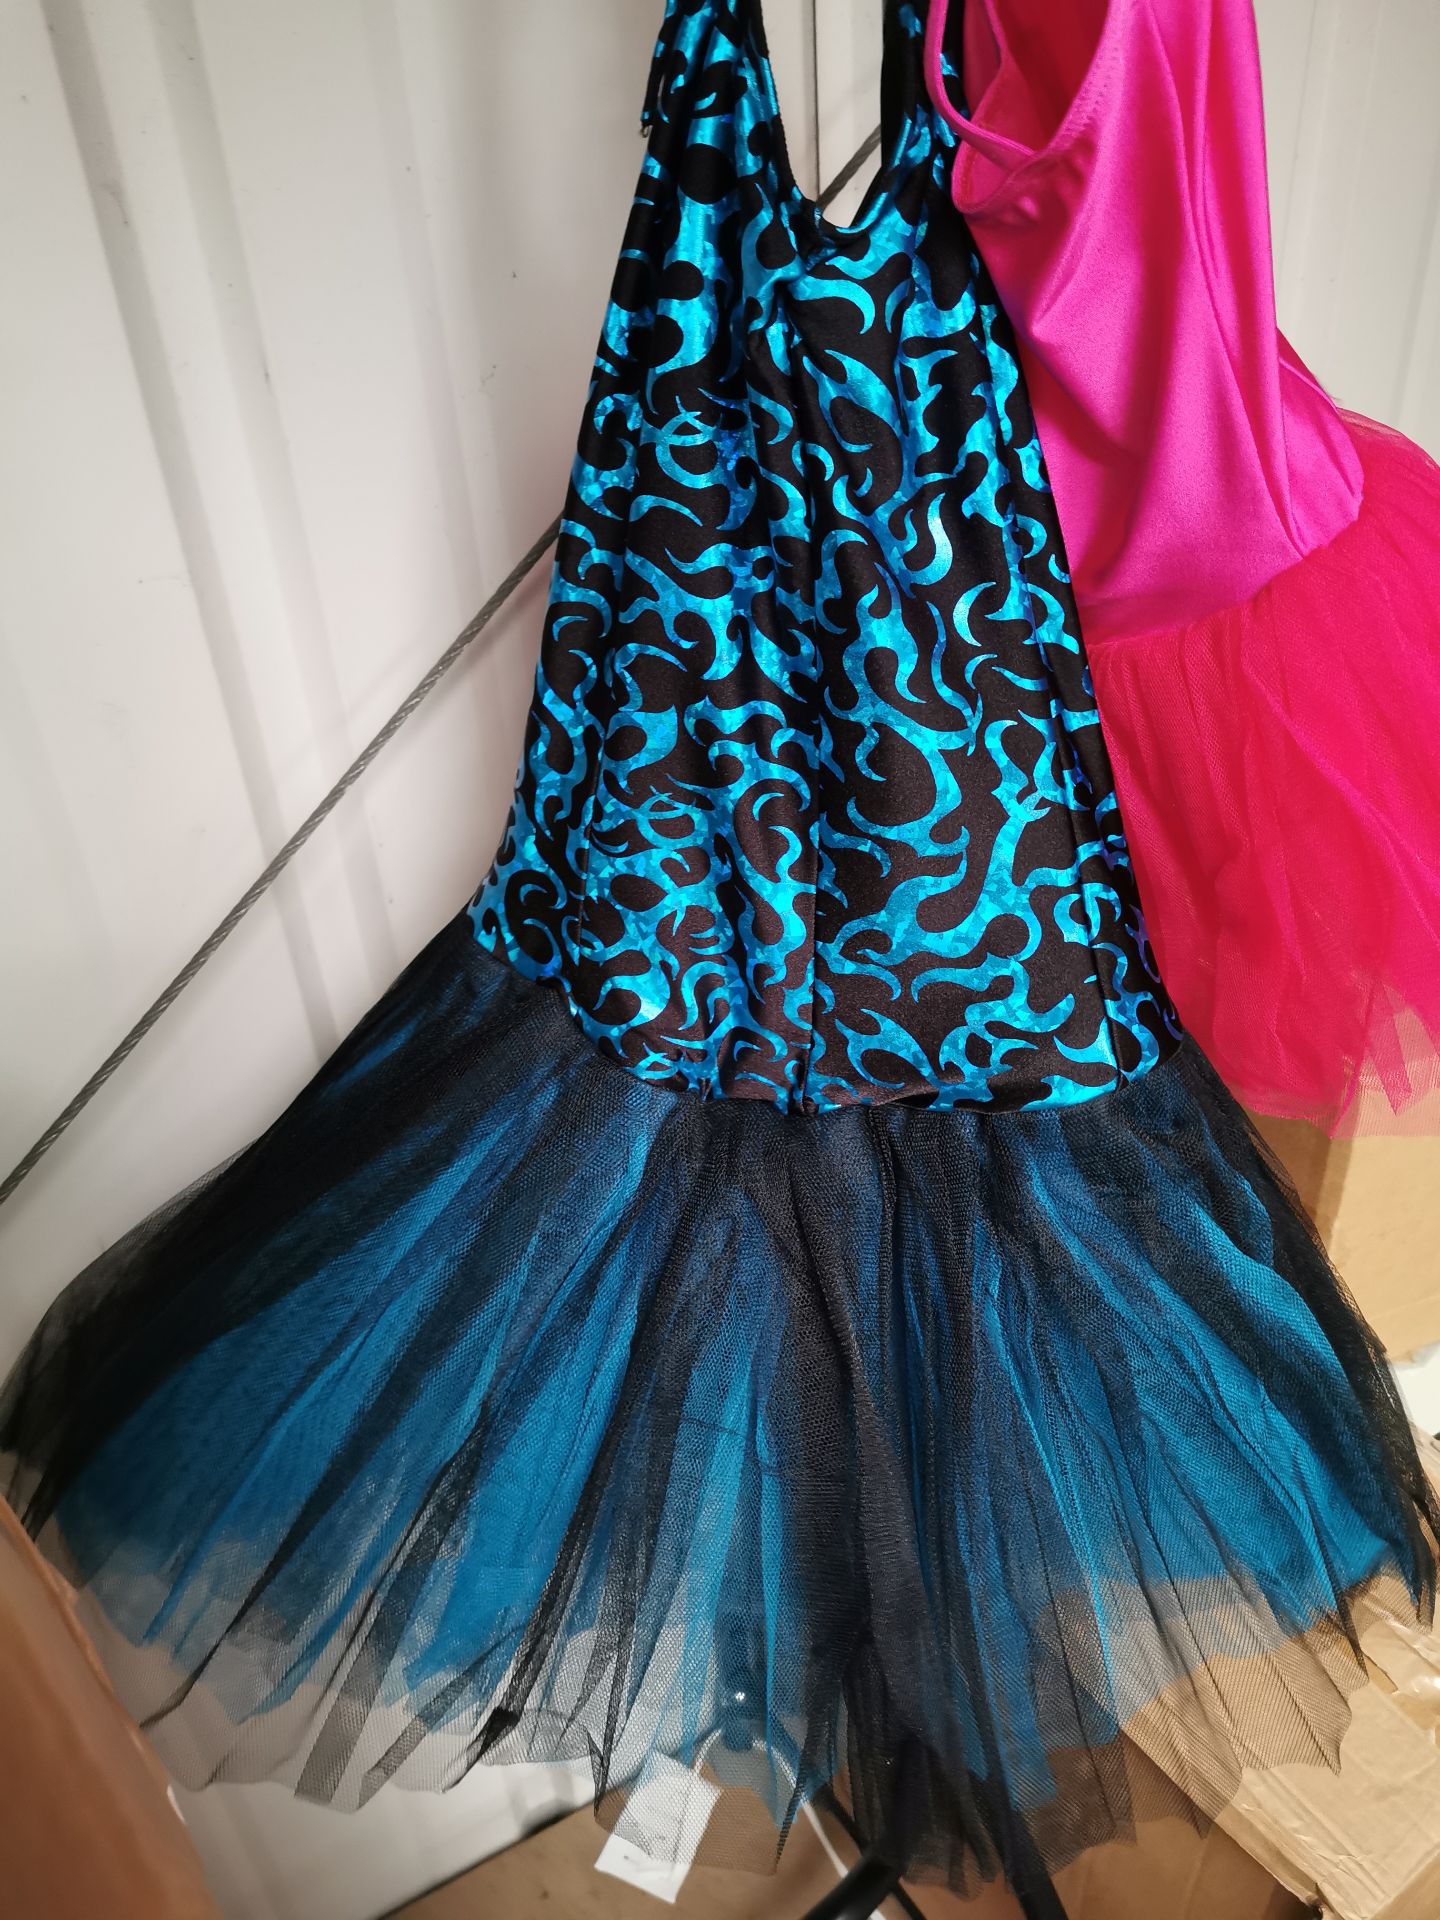 36+ Estimated tutu dresses in a variety of colours,designs and sizes - Image 3 of 3